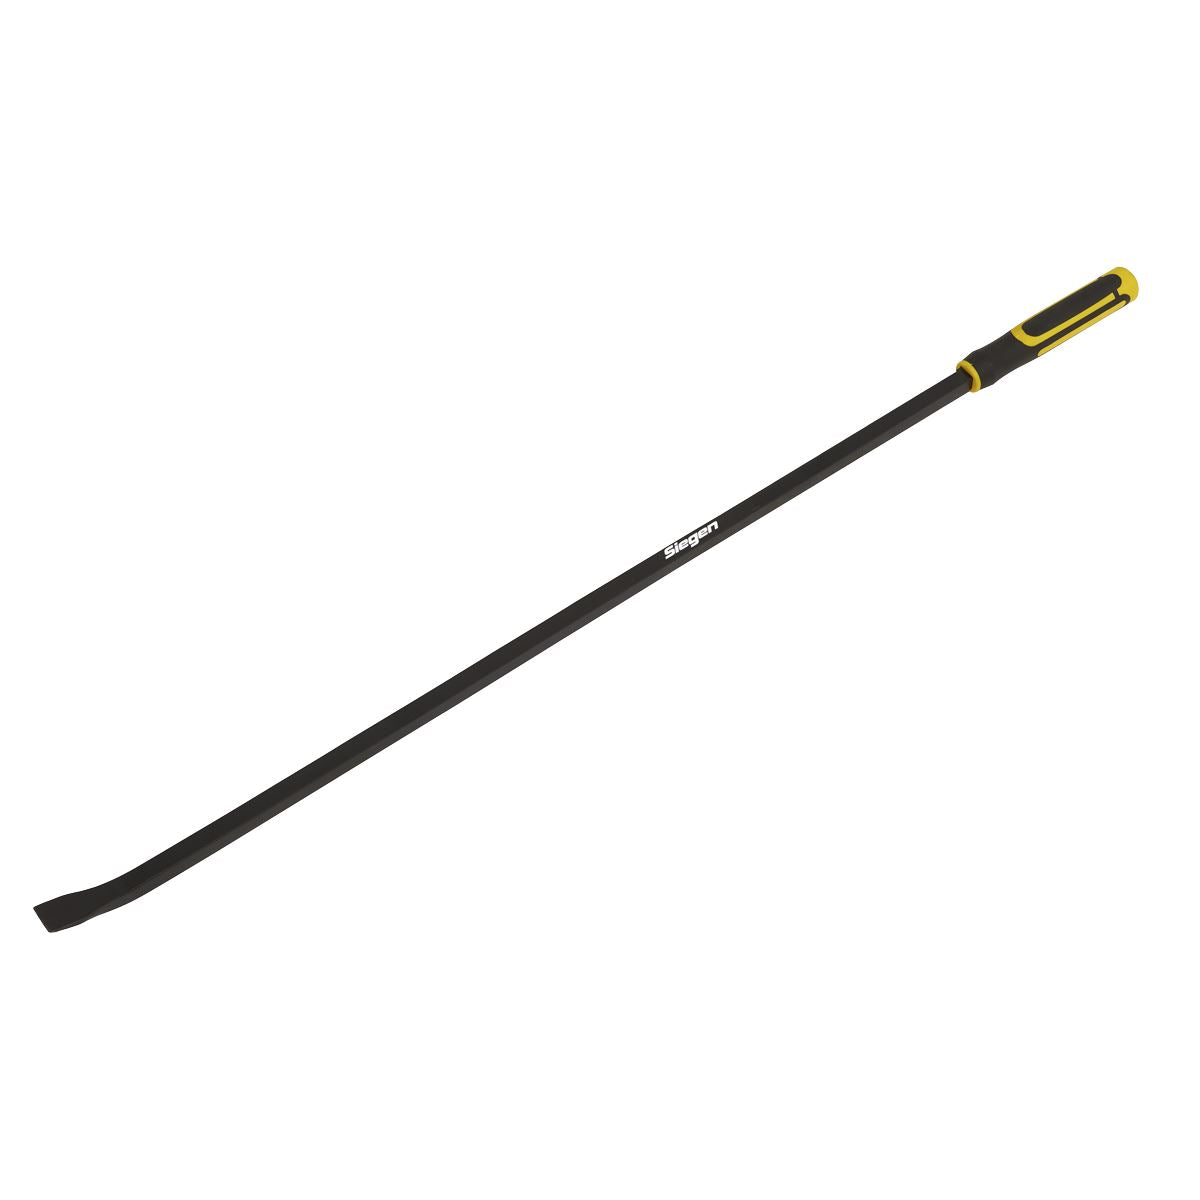 Sealey Pry Bar 25 Heavy-Duty 1220mm with Hammer Cap S01192